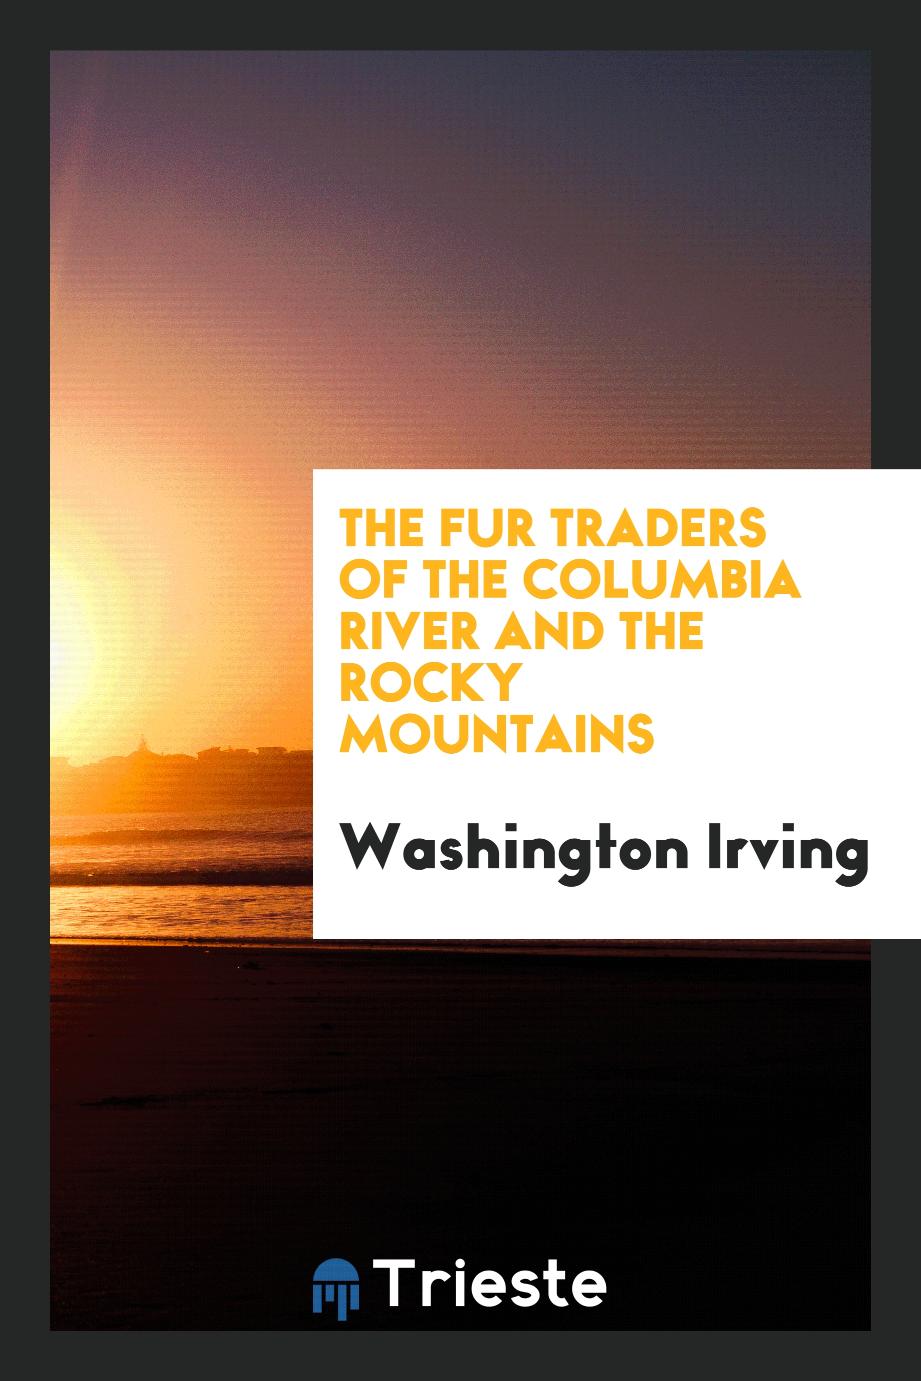 The fur traders of the Columbia river and the Rocky mountains